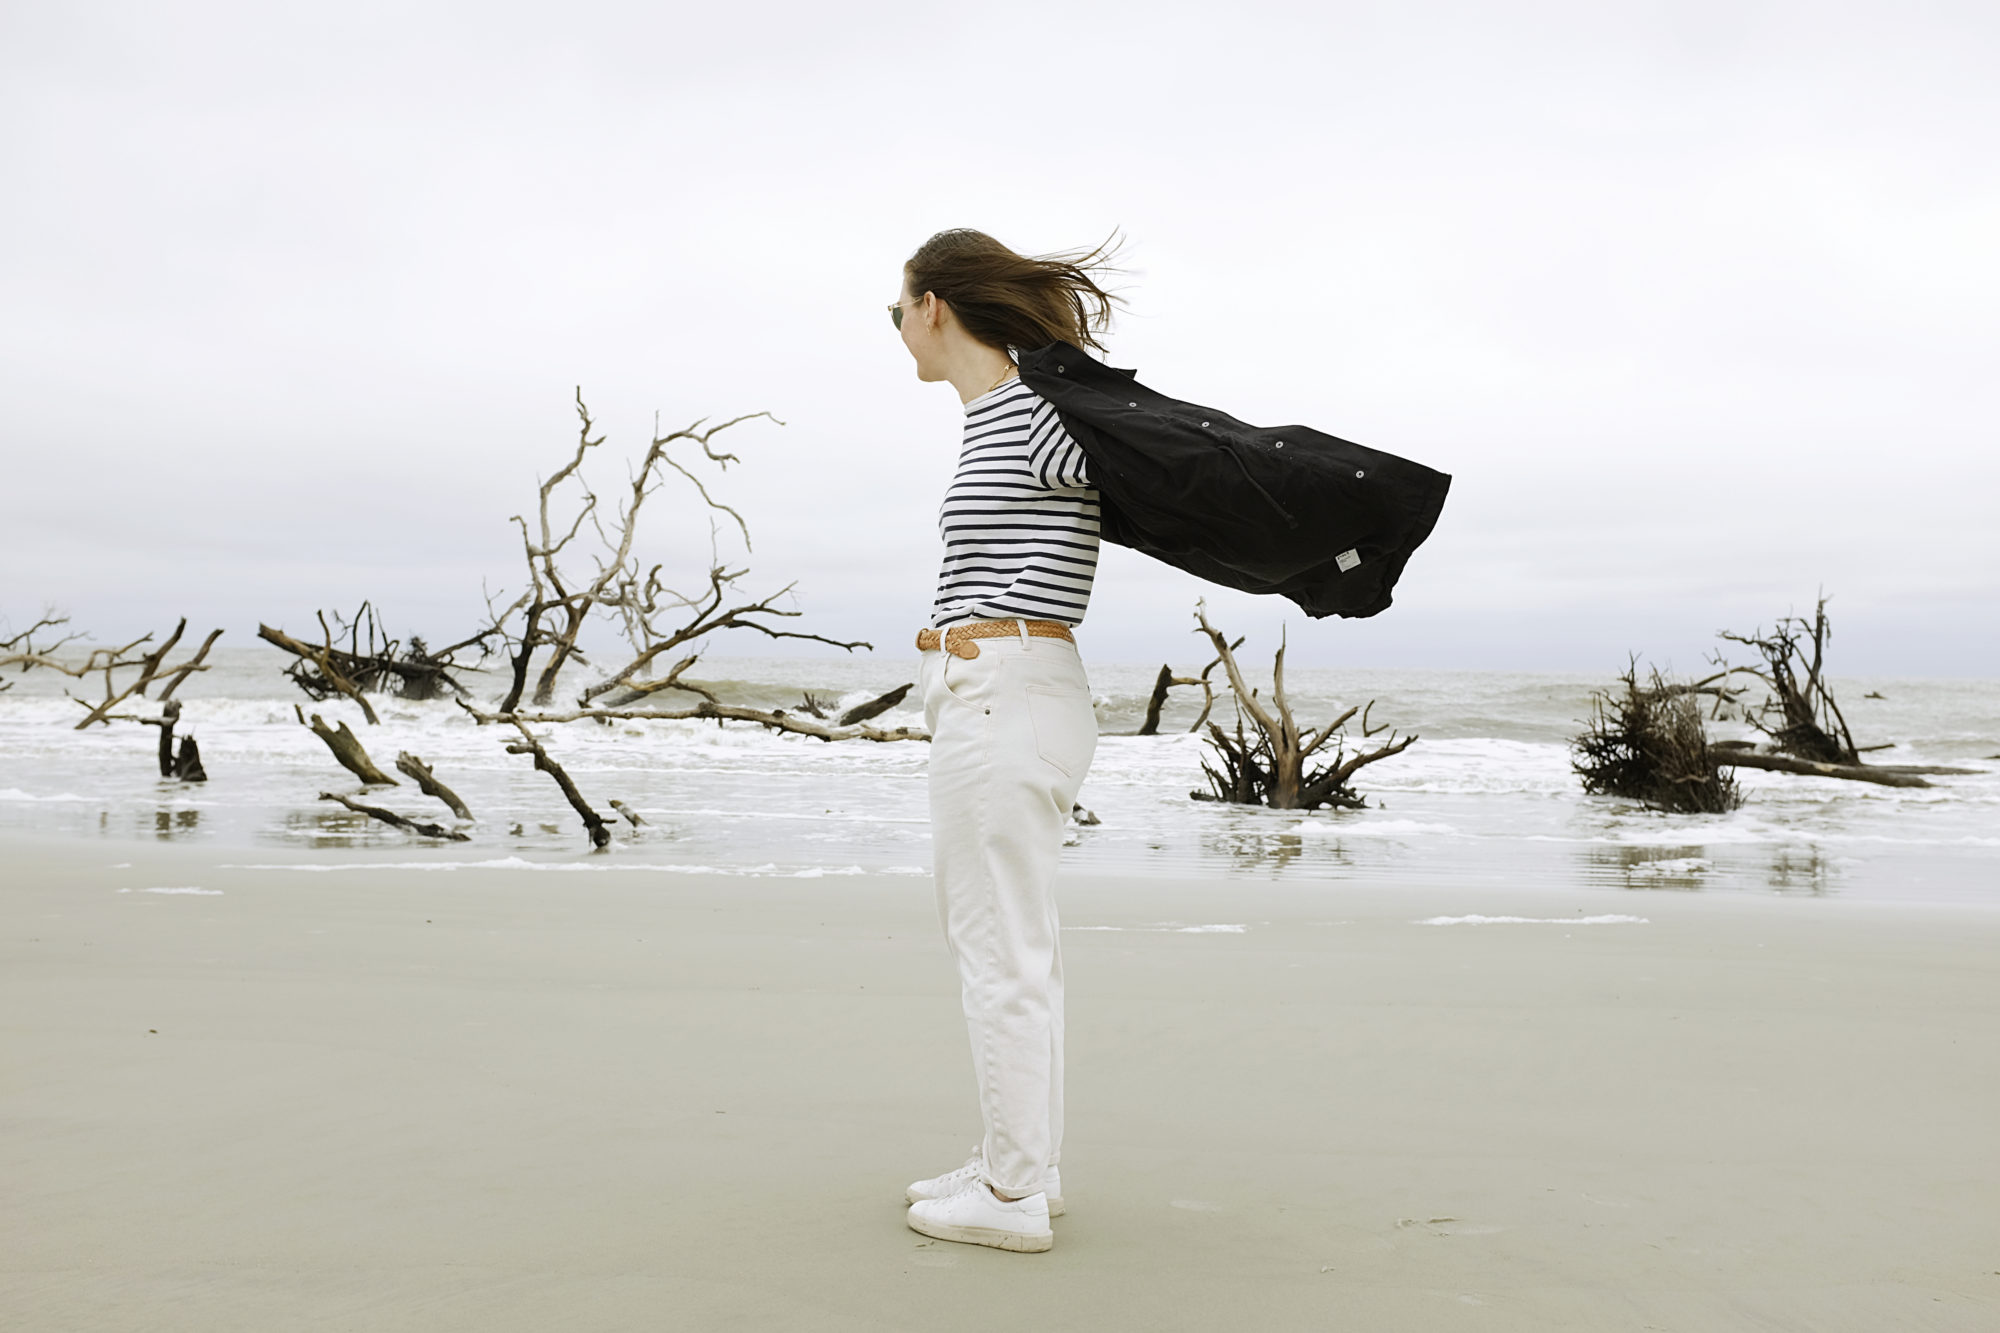 Alyssa stands on the beach with a jacket behind her blowing in the wind